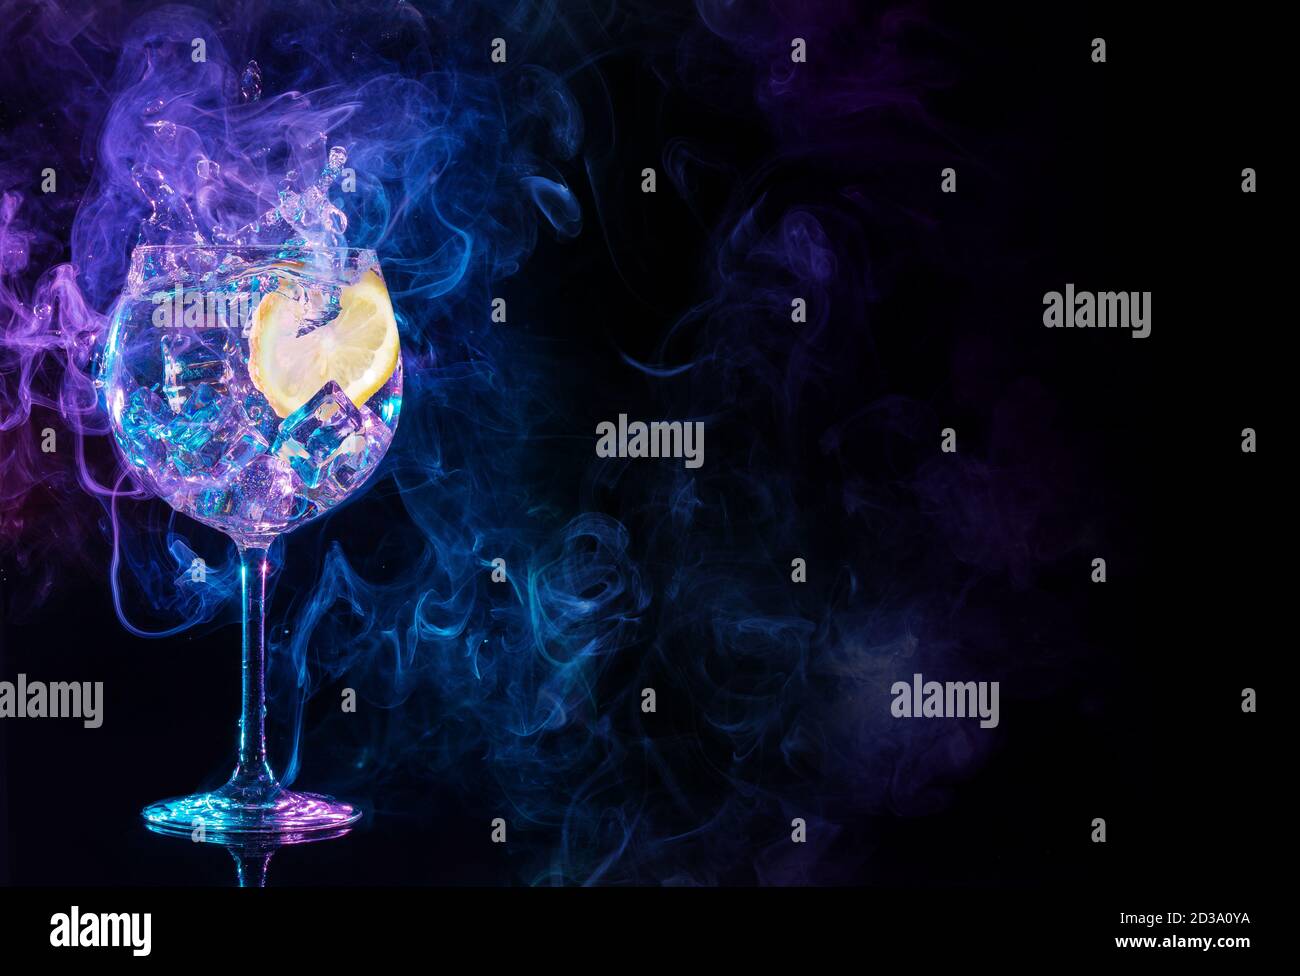 gin tonic cocktail splashing in blue and purple smoky background Stock Photo